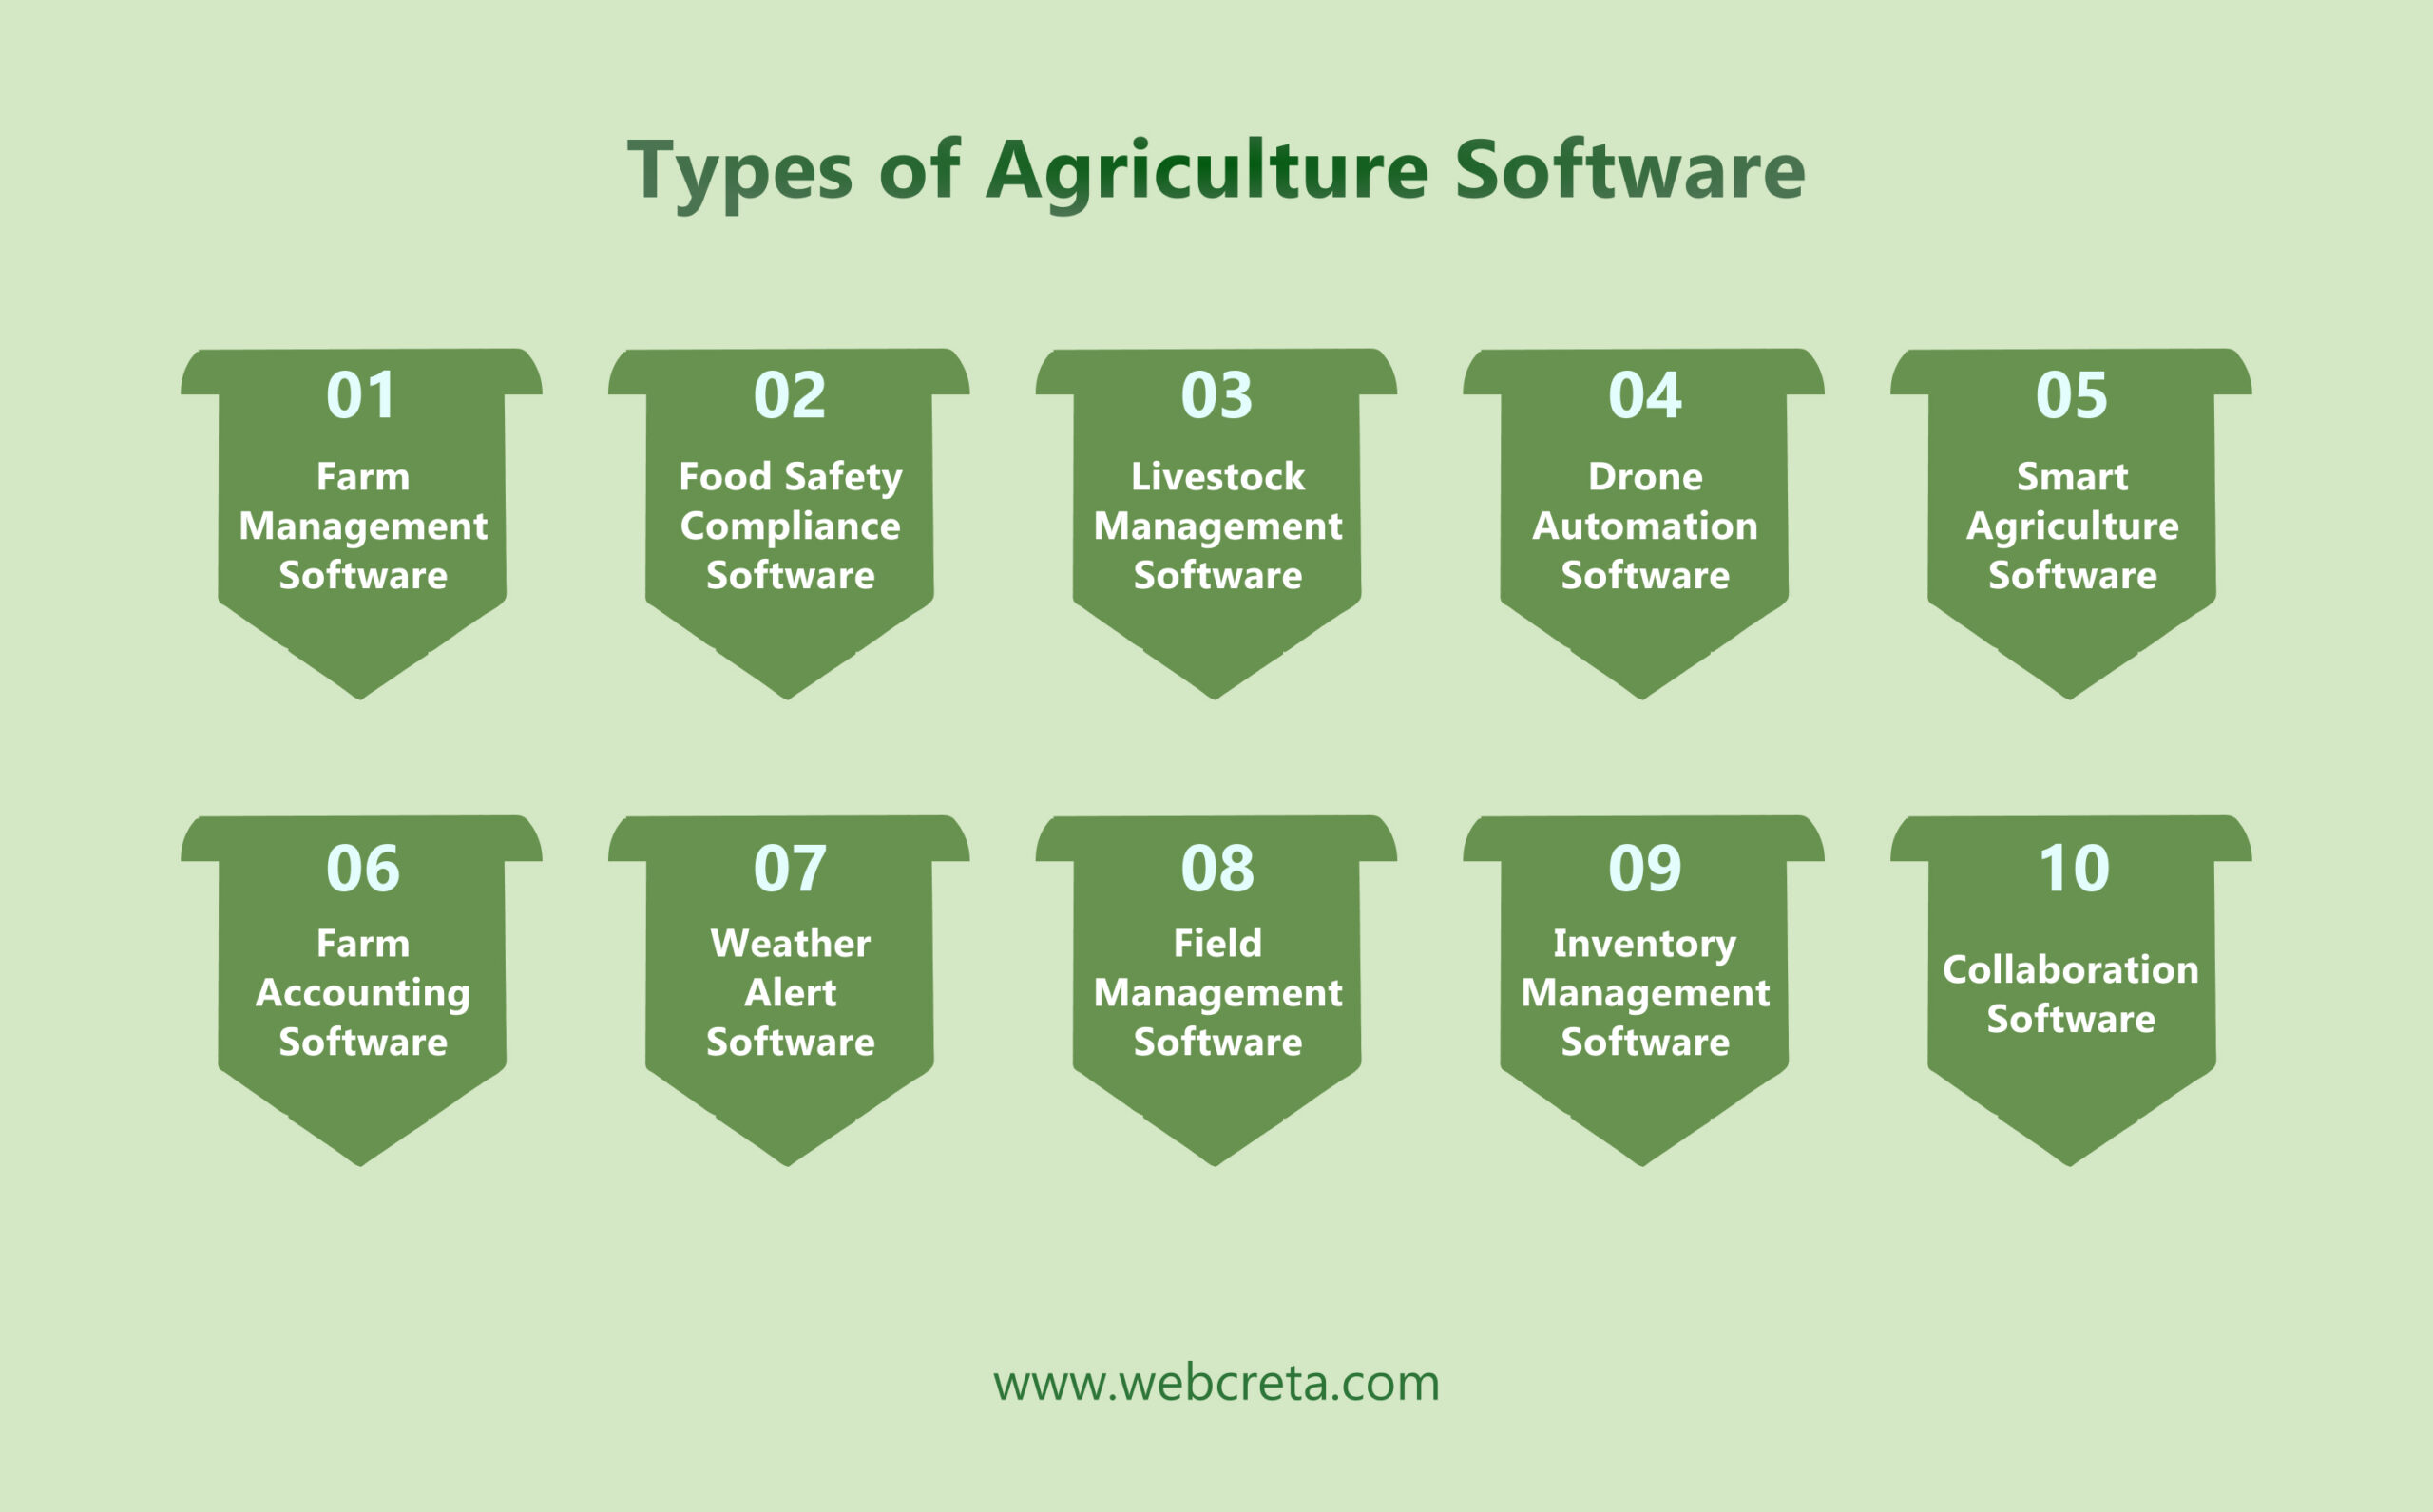 Types of Agriculture Software